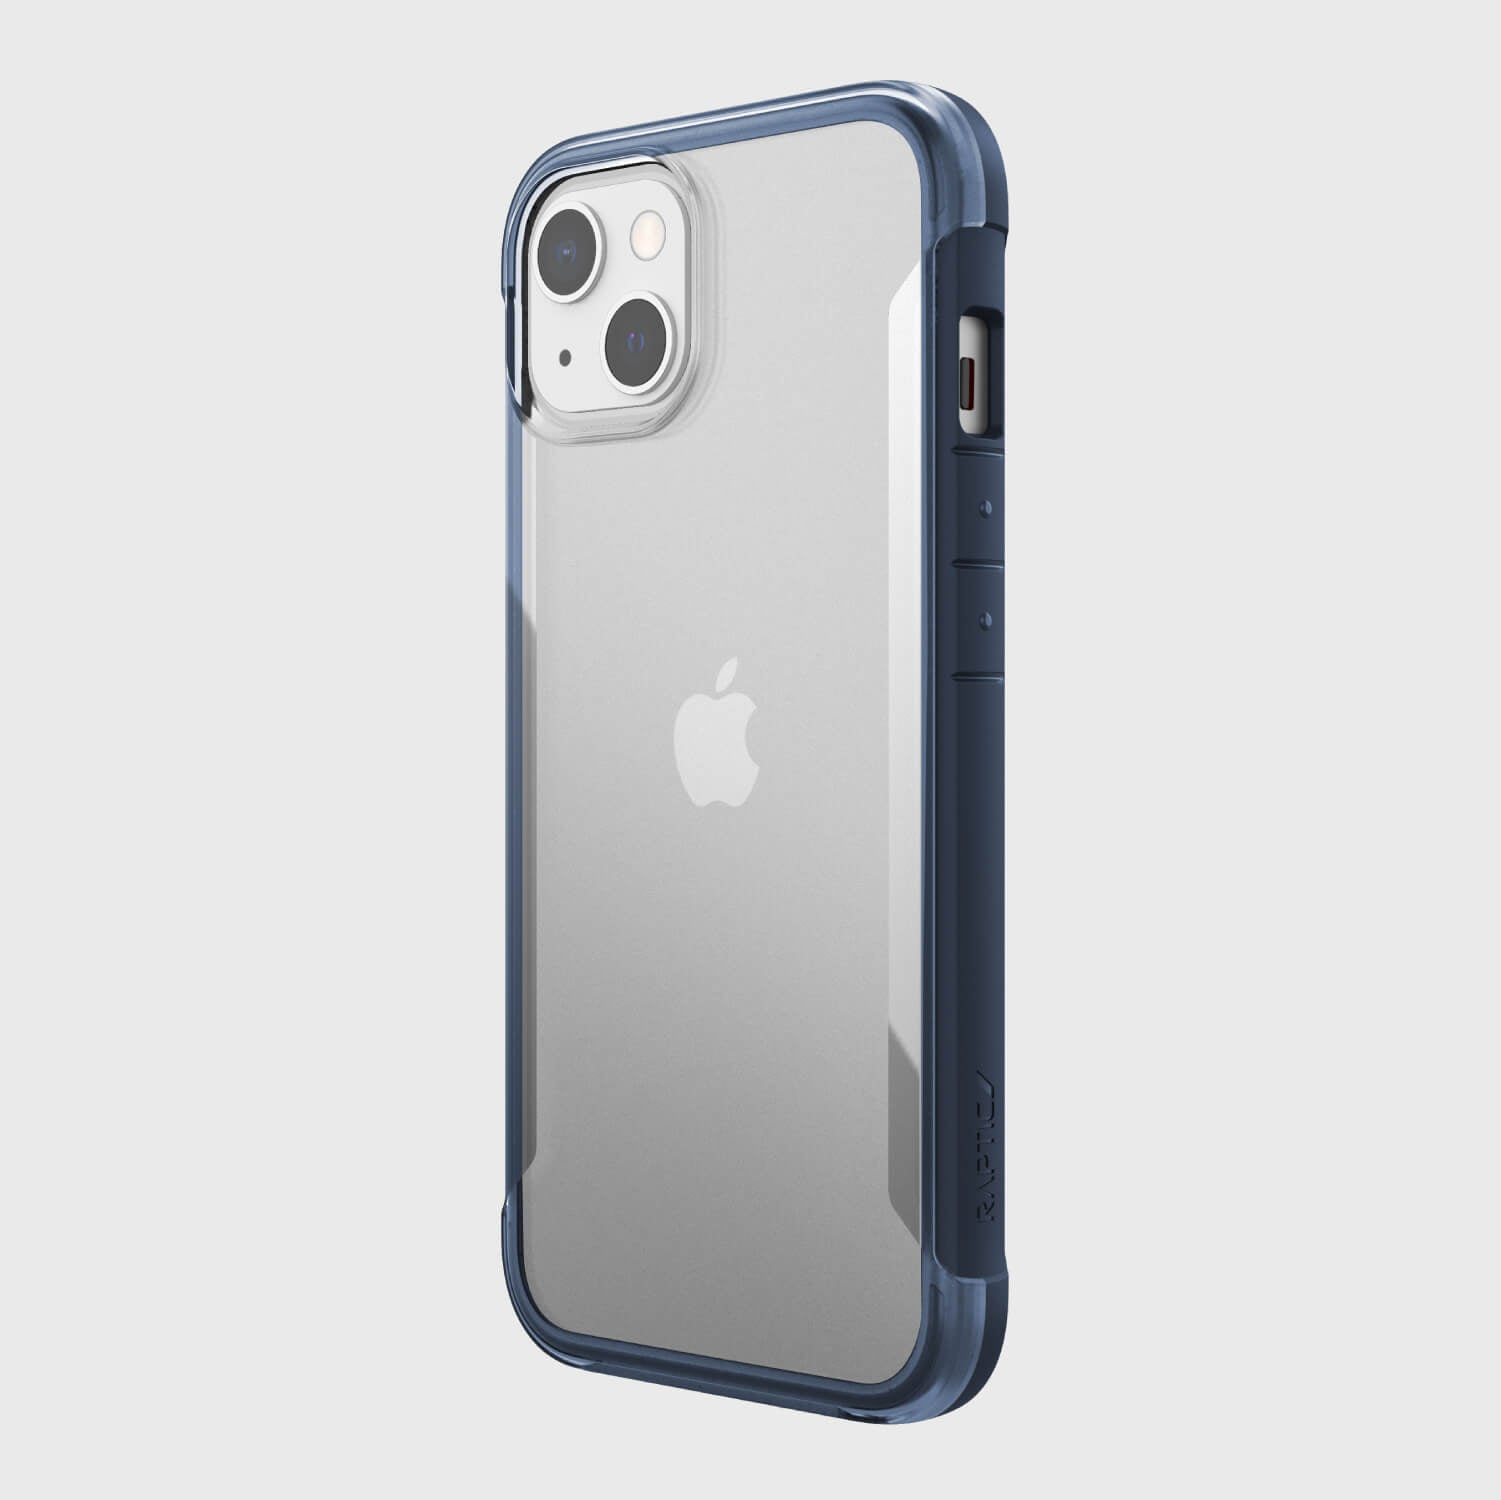 An eco-friendly and biodegradable iPhone 13 Case - TERRAIN in blue from Raptic.